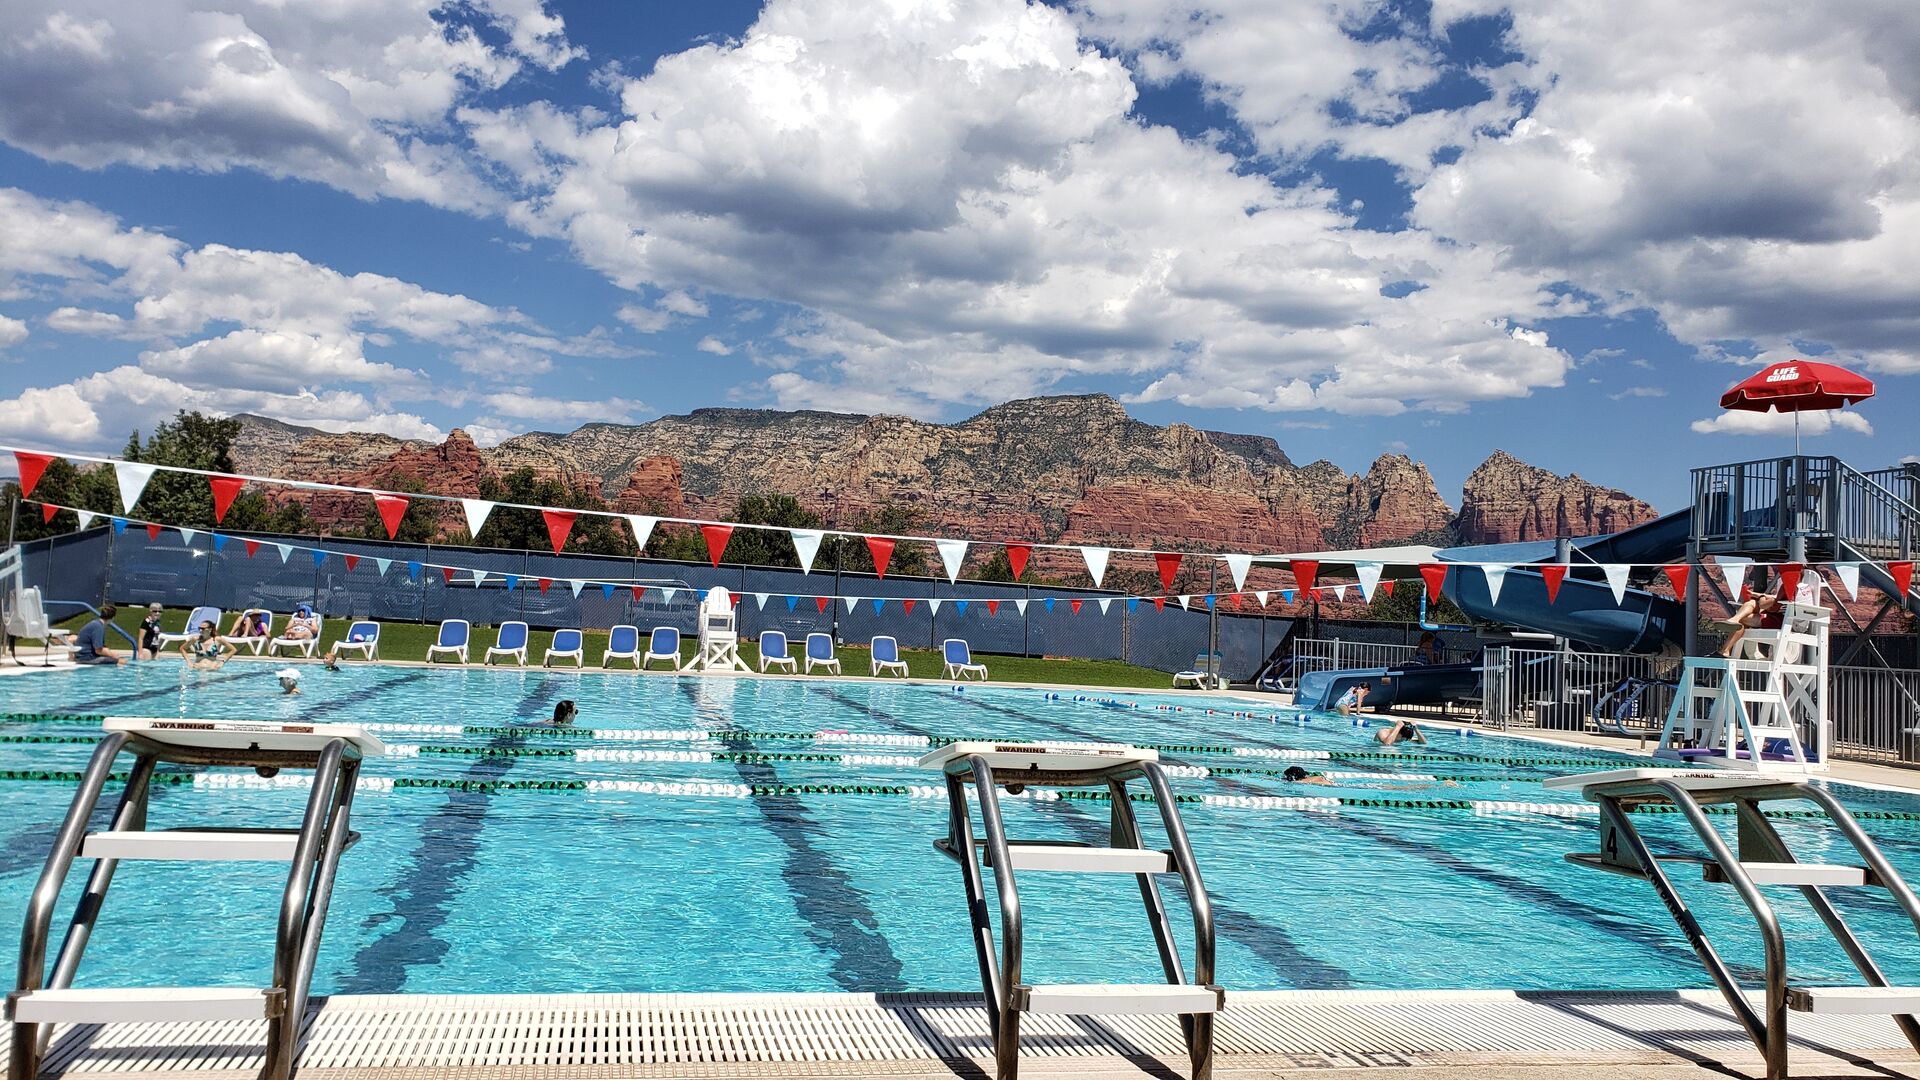 Sedona Community Pool with complimentary passes included!